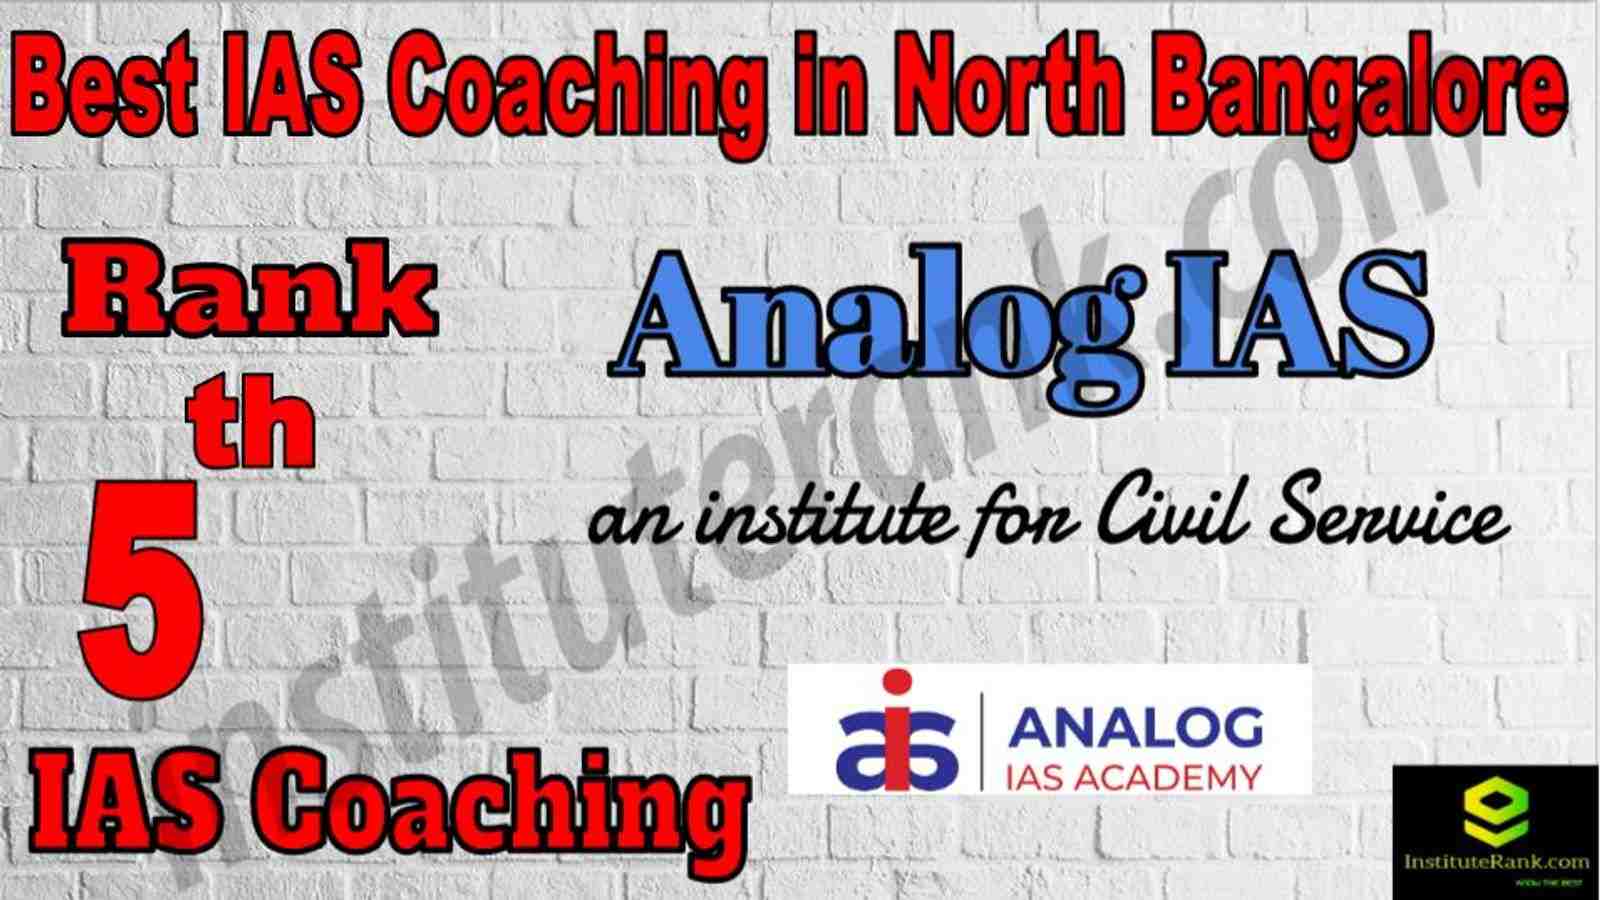 5th Best IAS Coaching in North Bangalore